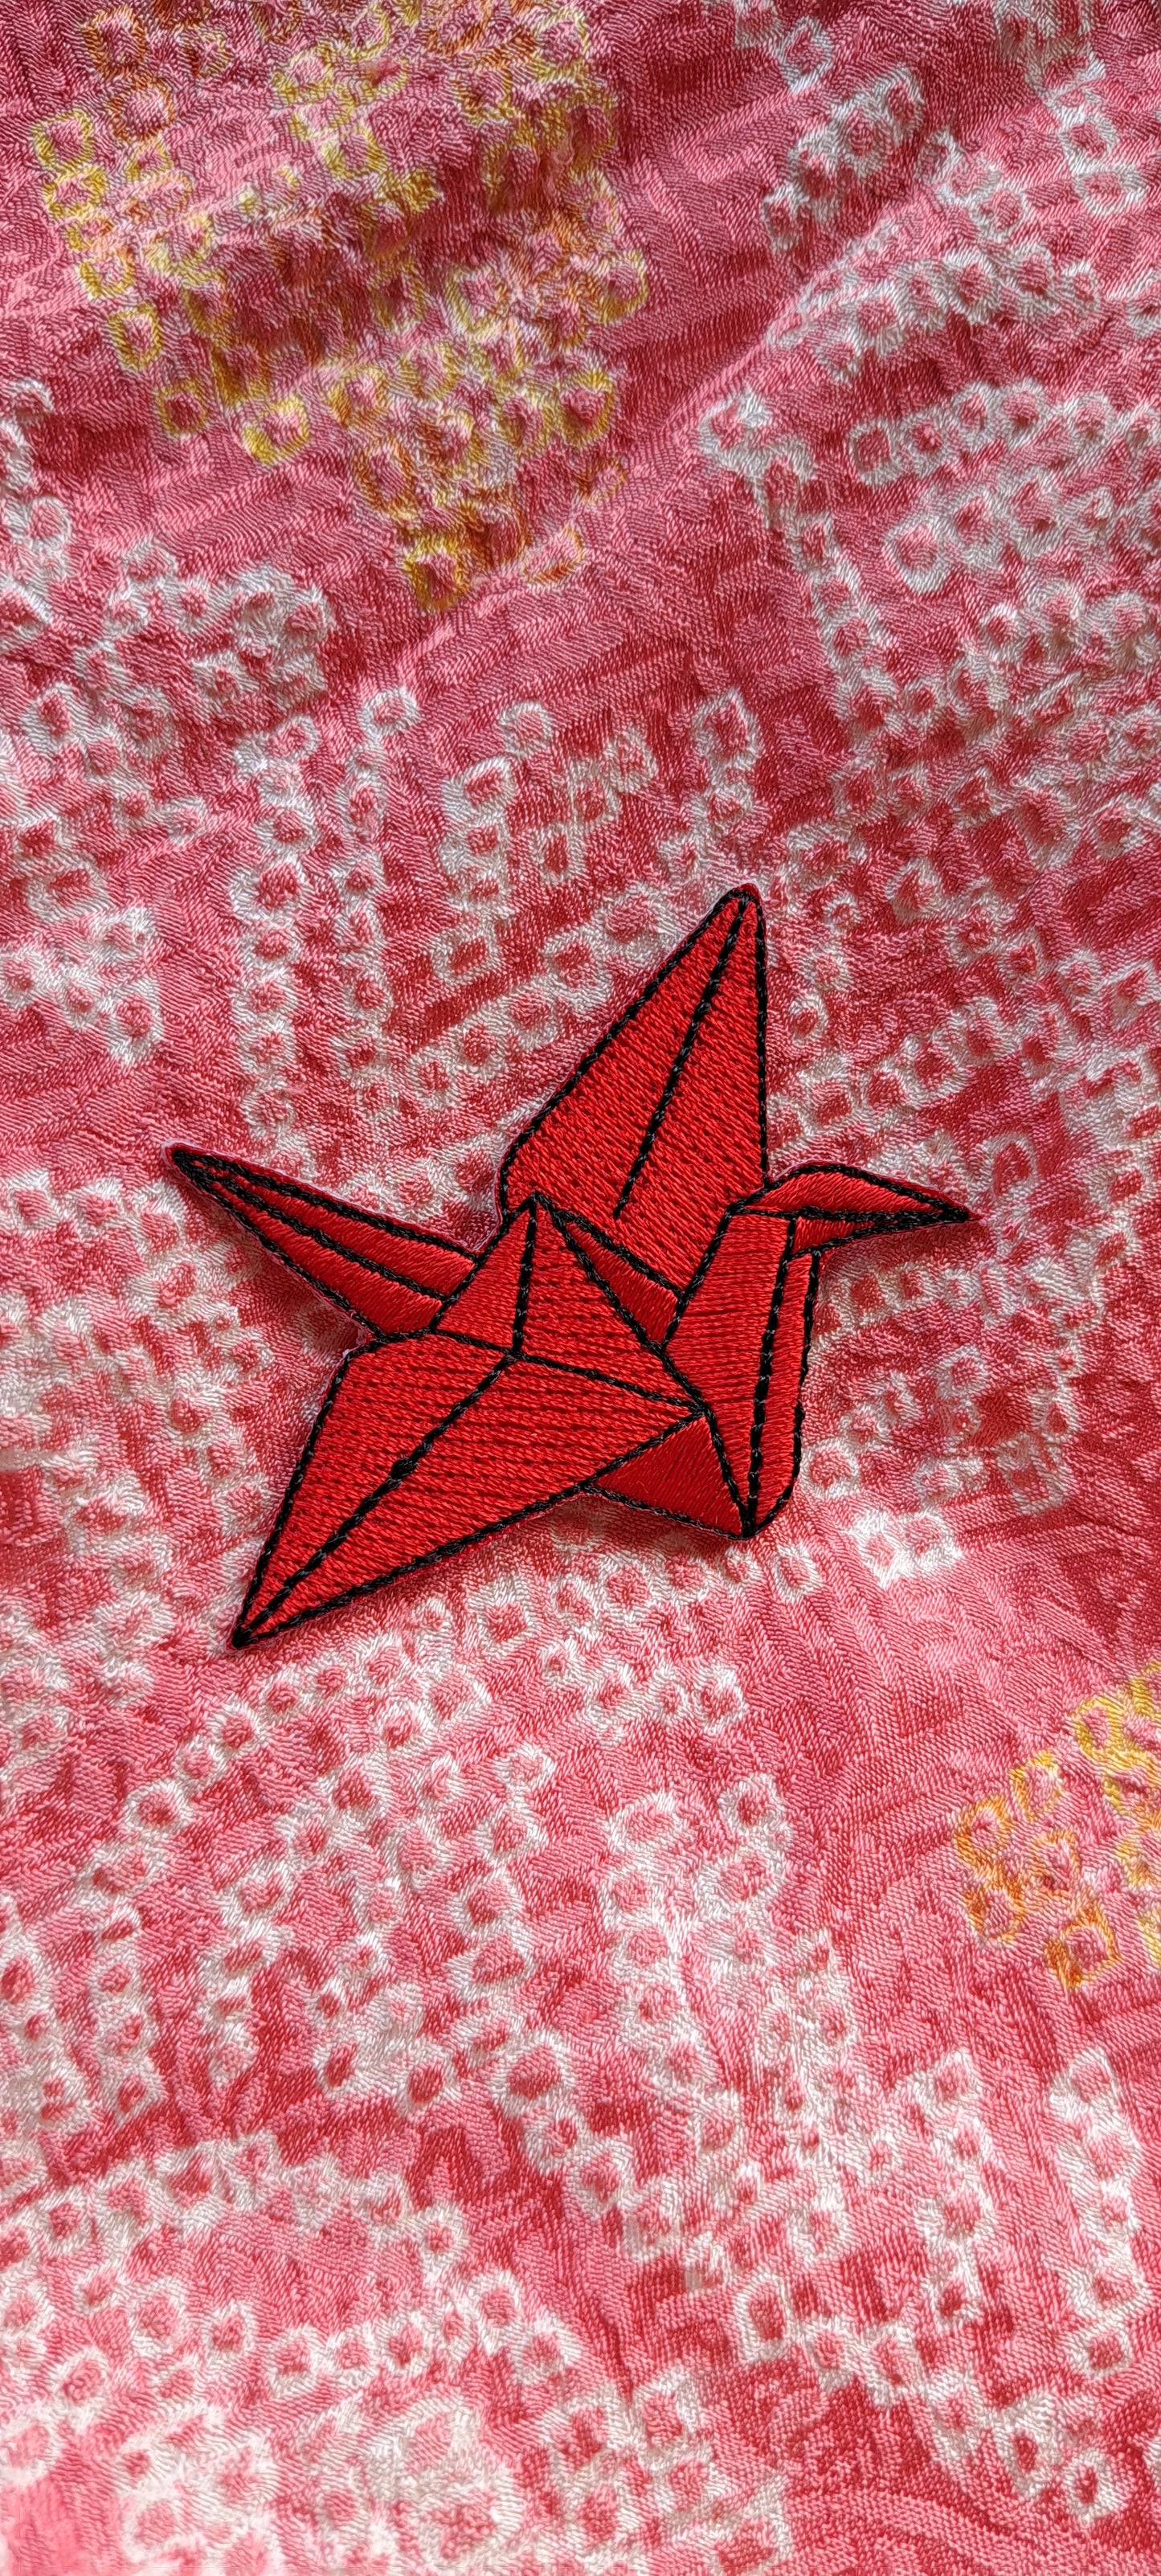 Red crane origami signifies fortune, long life and love